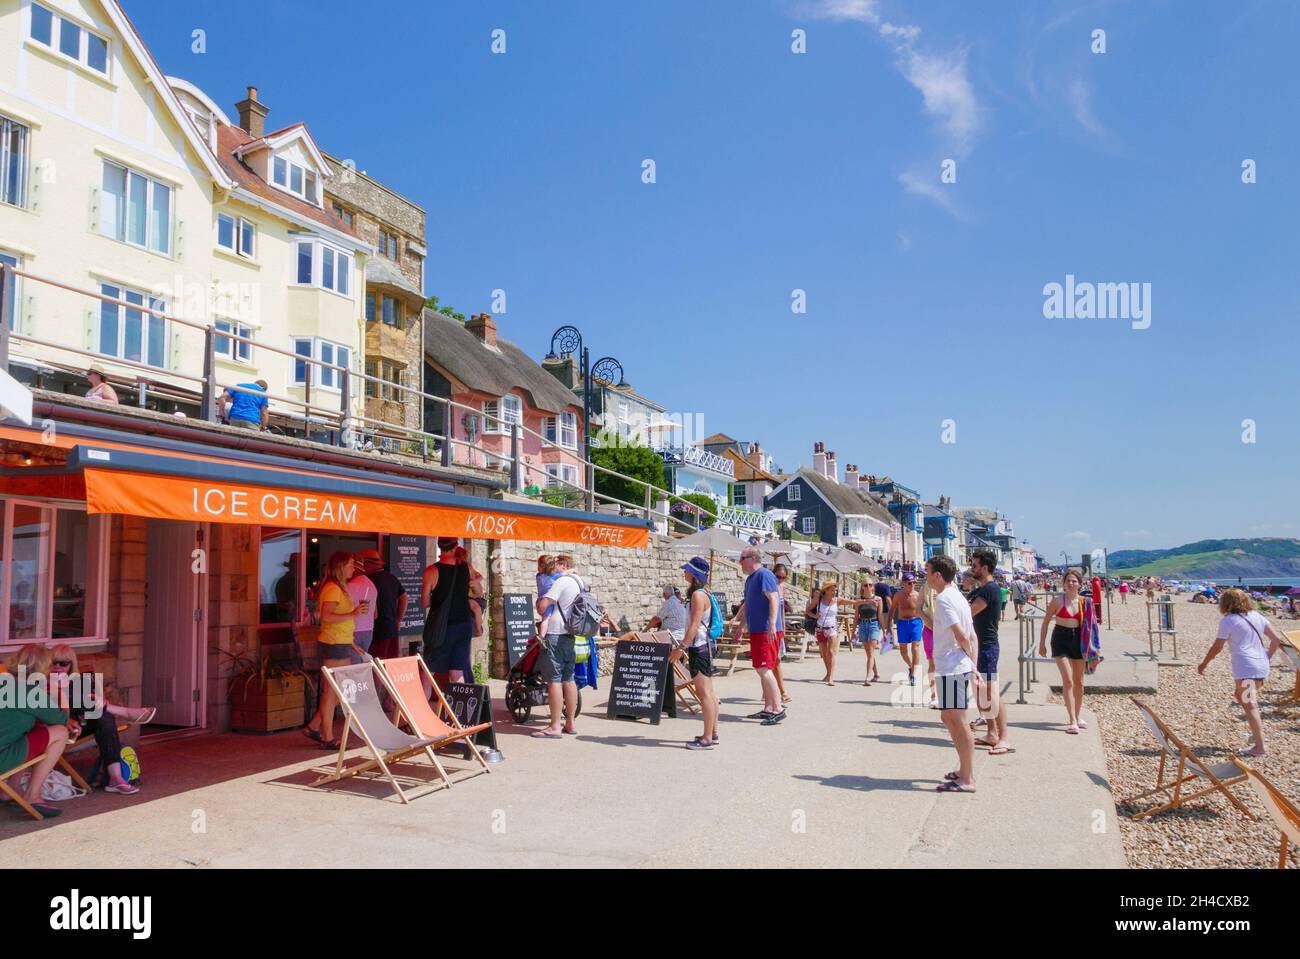 People queueing for Ice cream at an Ice cream kiosk cafe on Marine Parade seafront overlooking sandy beach at Lyme Regis Dorset England UK GB Europe Stock Photo